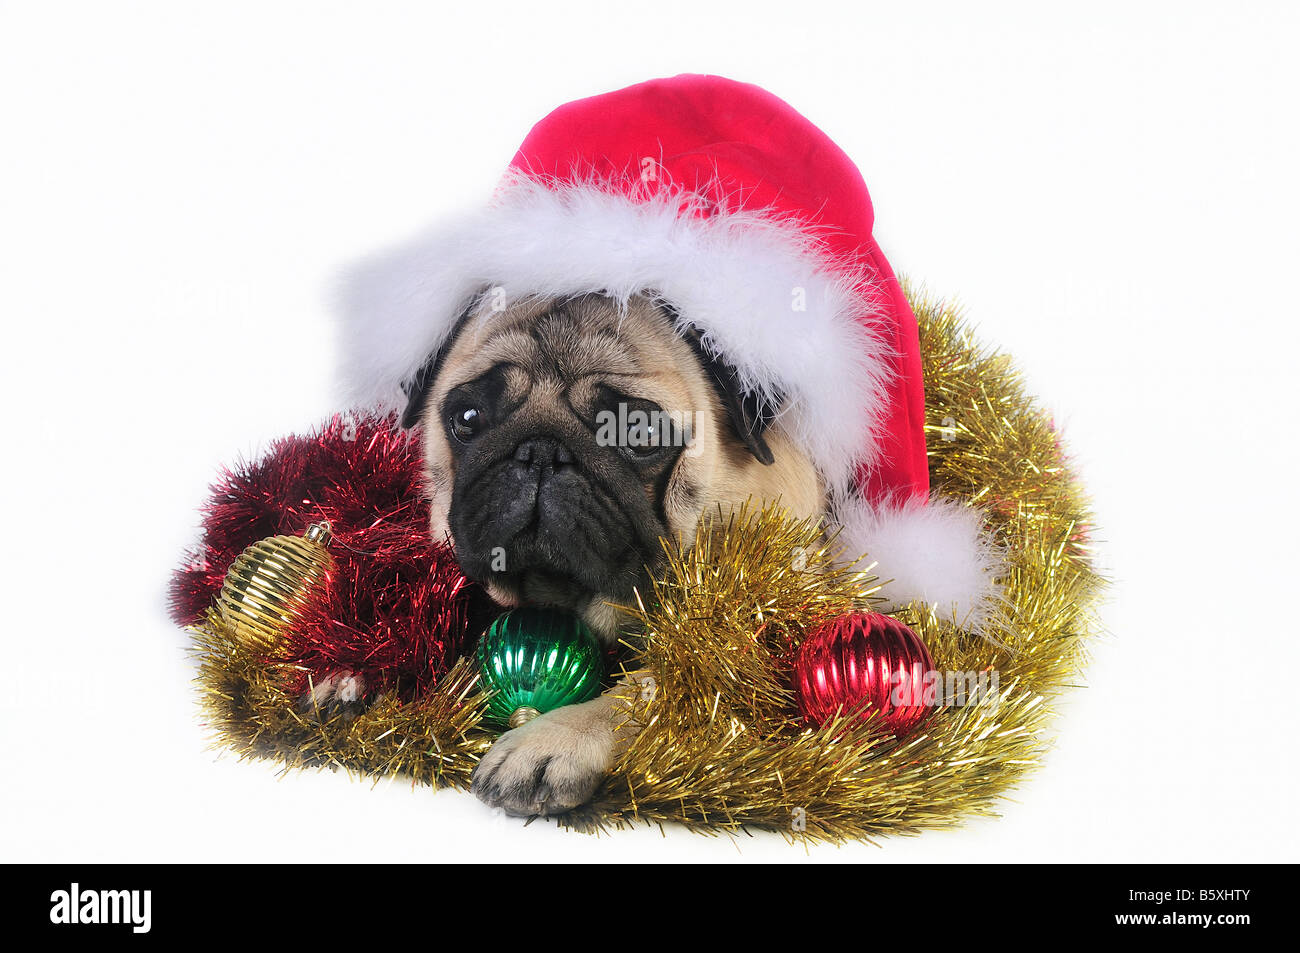 Pug dog wearing a santa hat, surrounded by Christmas ornaments . Stock Photo